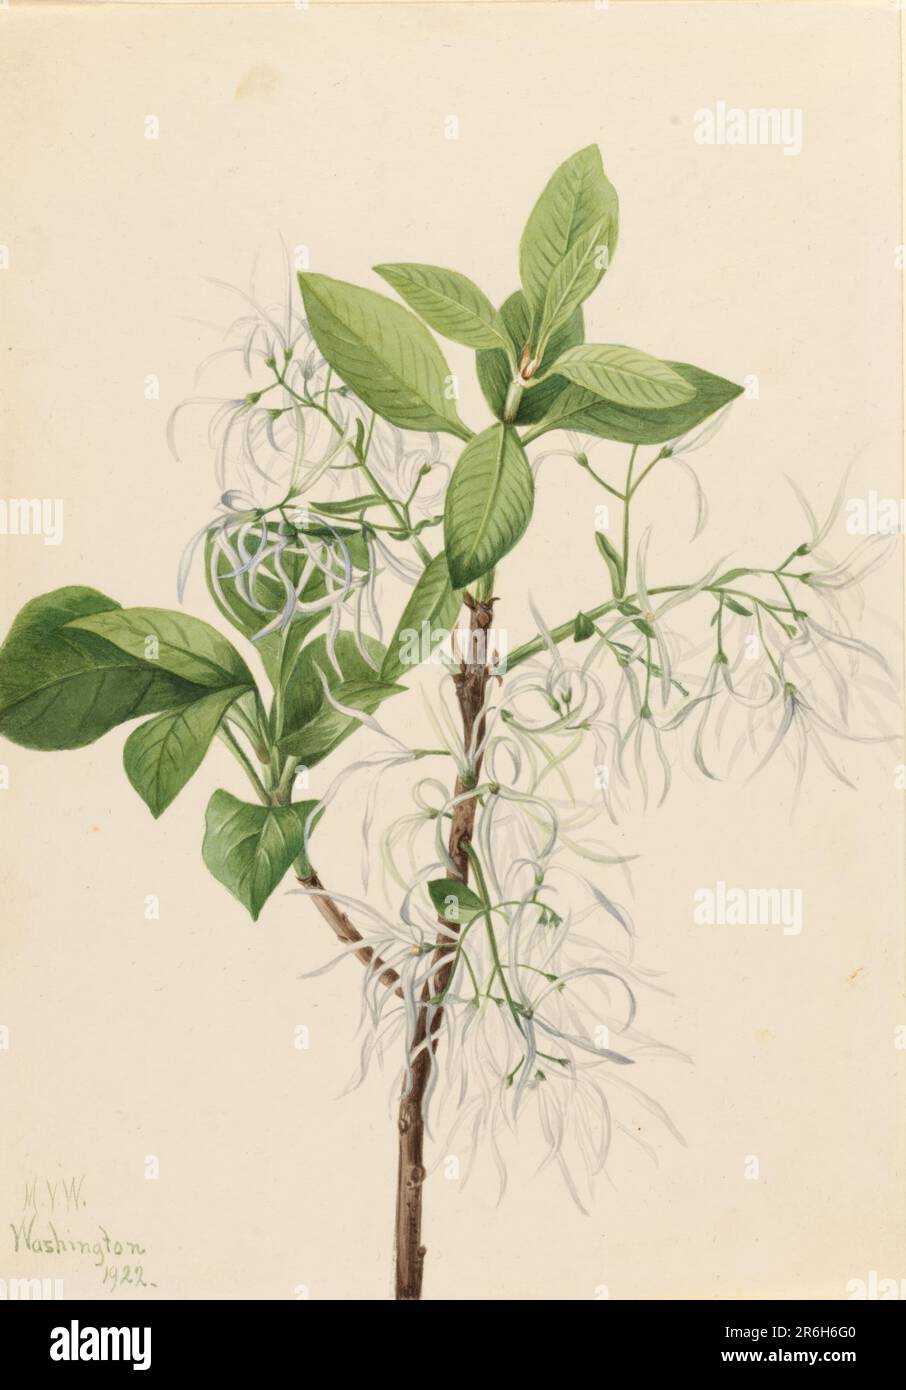 Fringe Tree (Chionanthus virginica). Date: 1922. Watercolor on paper. Museum: Smithsonian American Art Museum. Stock Photo